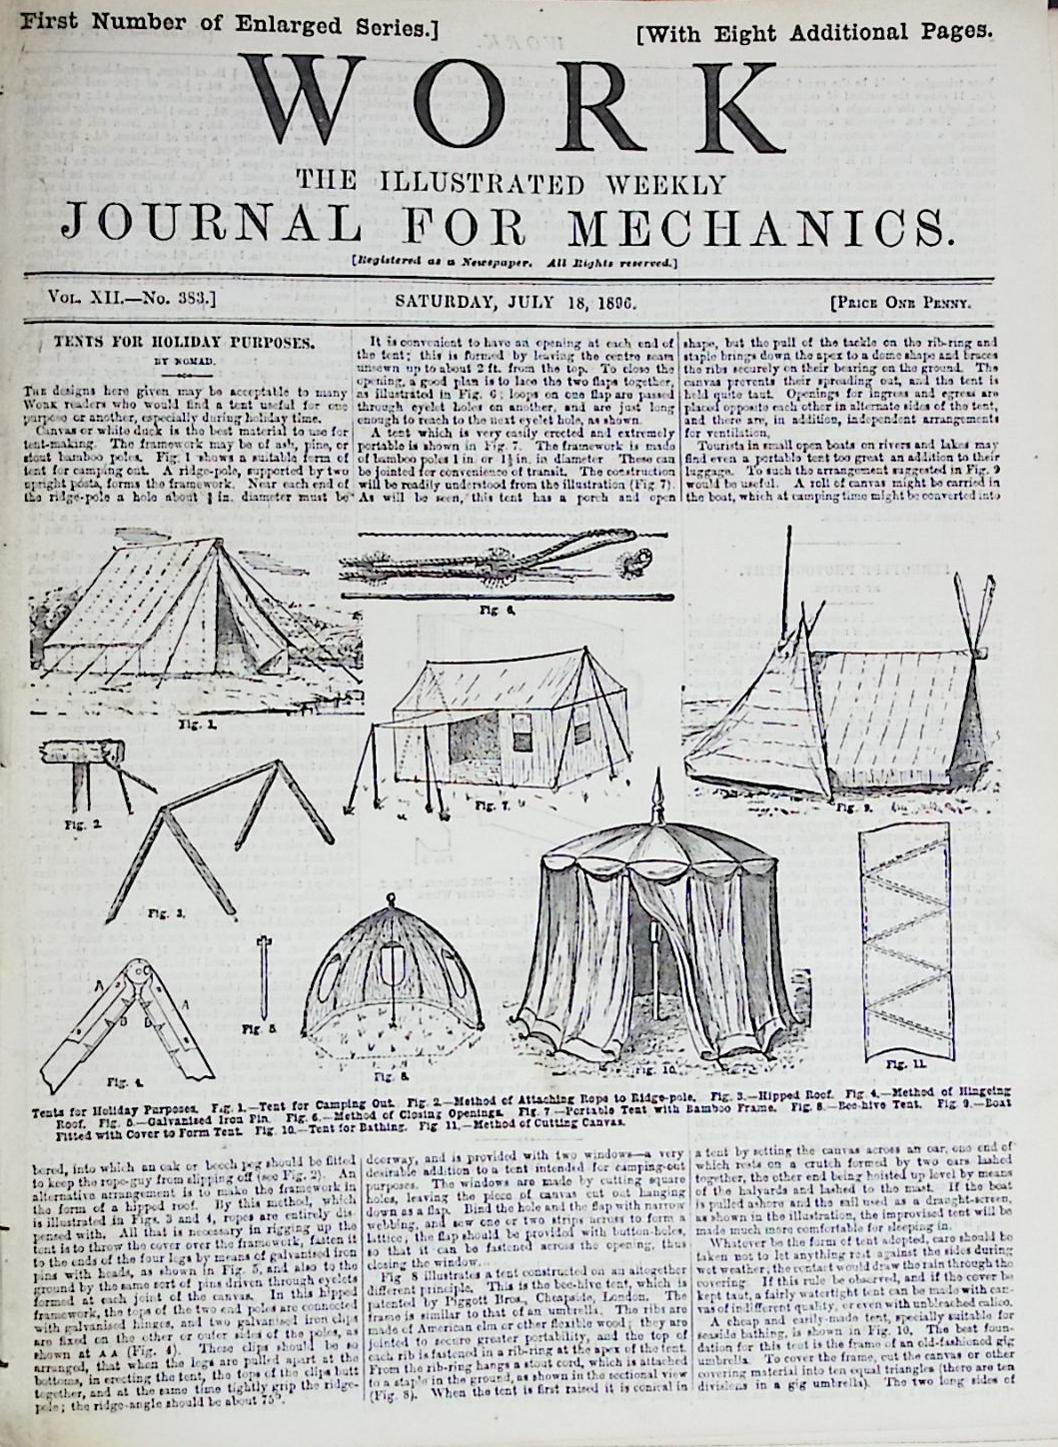 Work. The Illustrated Weekly Journal for Mechanics. Volume XII. July 1896 to January 1897.